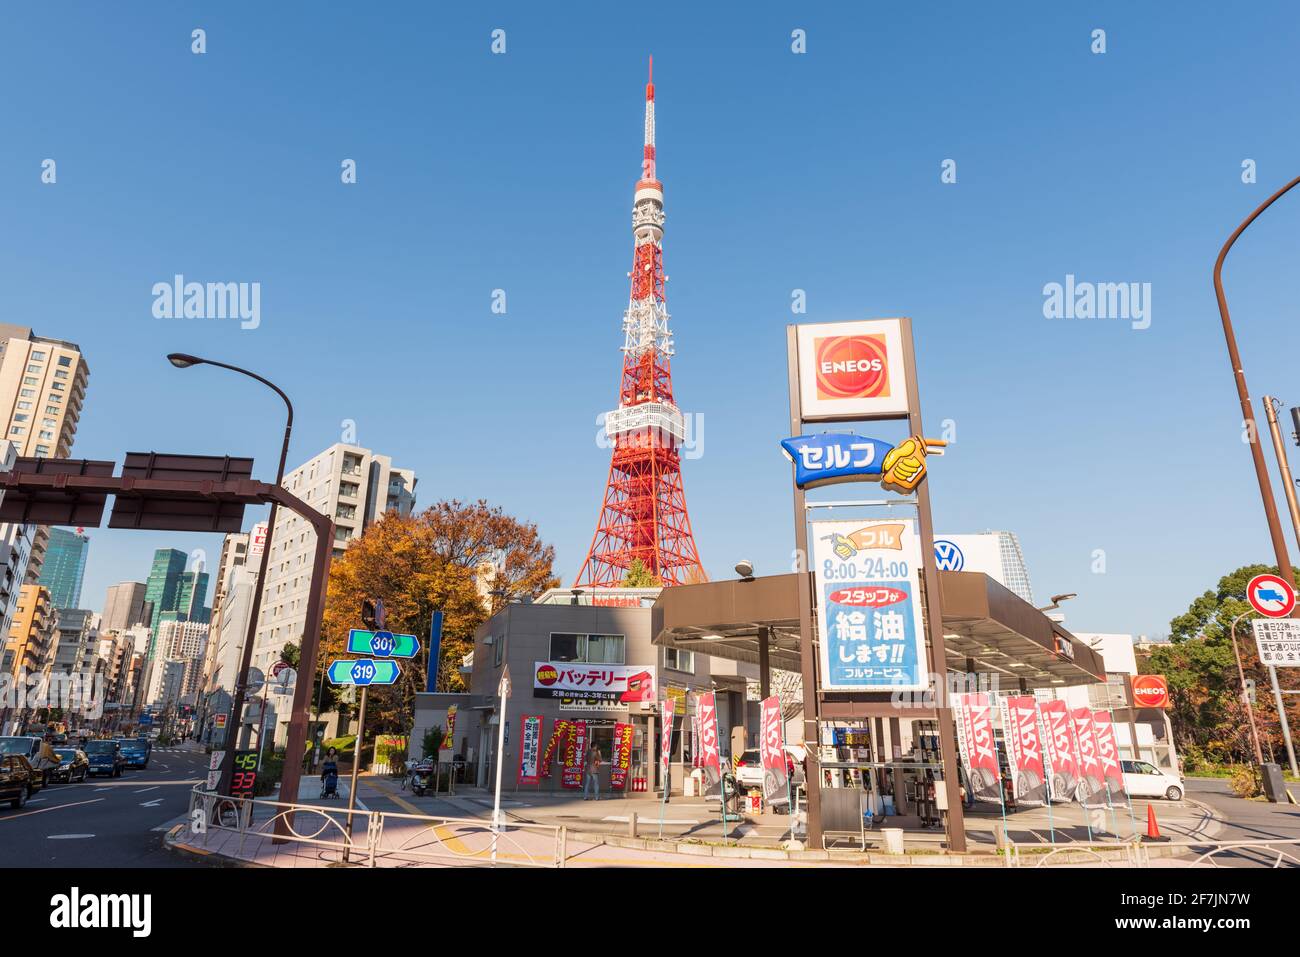 Tokyo, Japan - December 09, 2015: Tokyo Tower near an ENEOS Petrol Station. ENEOS corporation is a Japanese petroleum company. Stock Photo